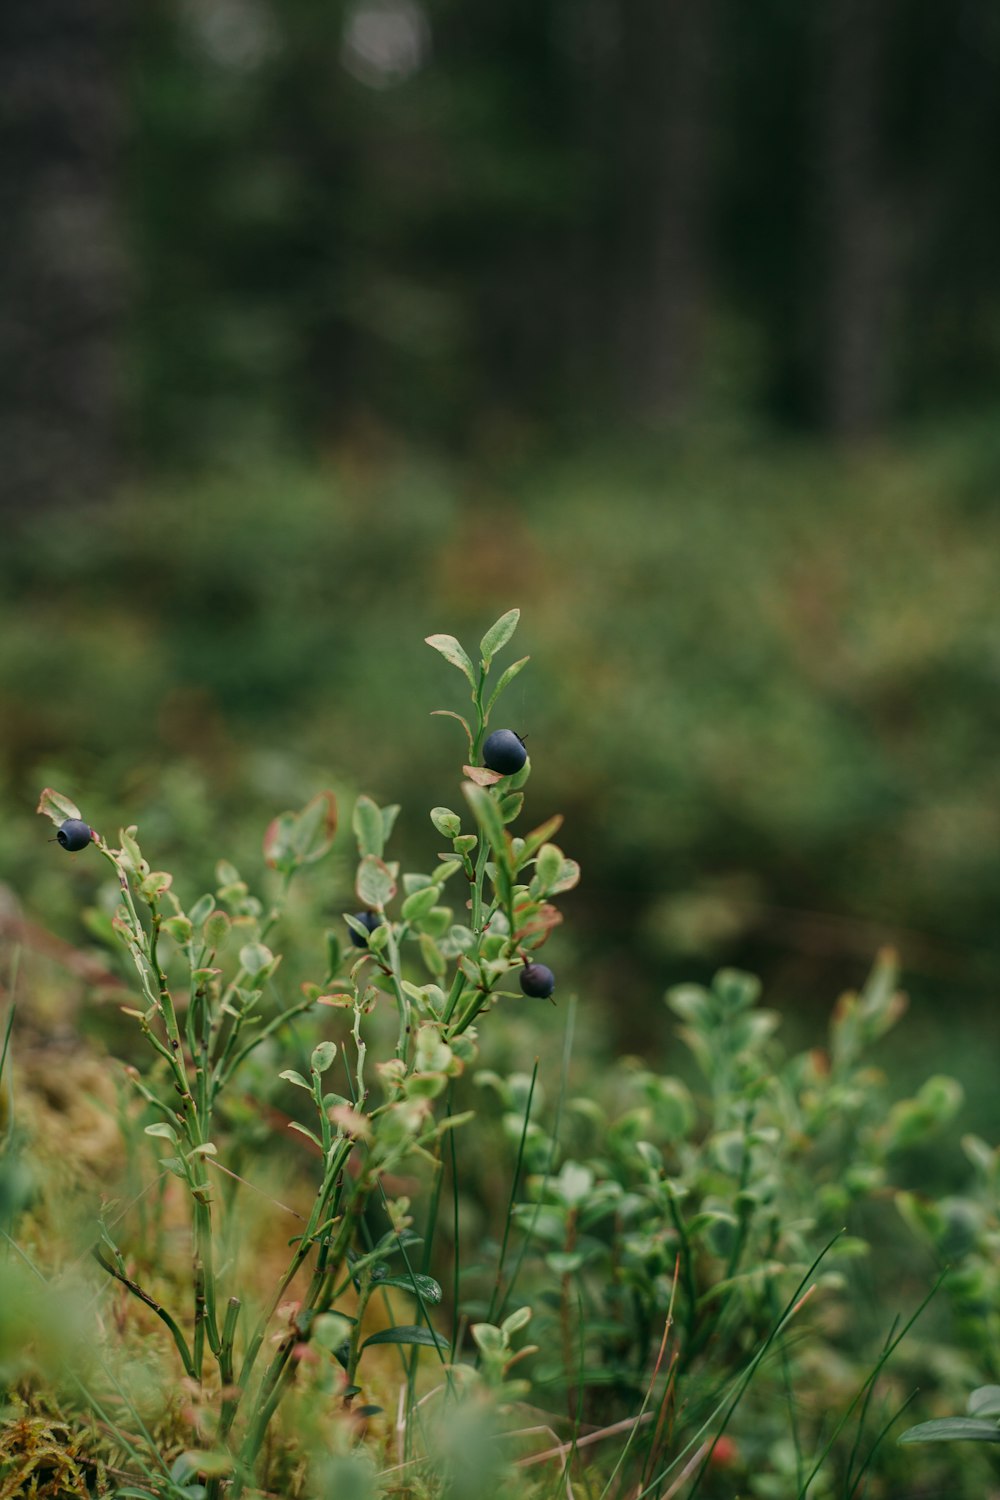 a bush with berries growing on it in a forest